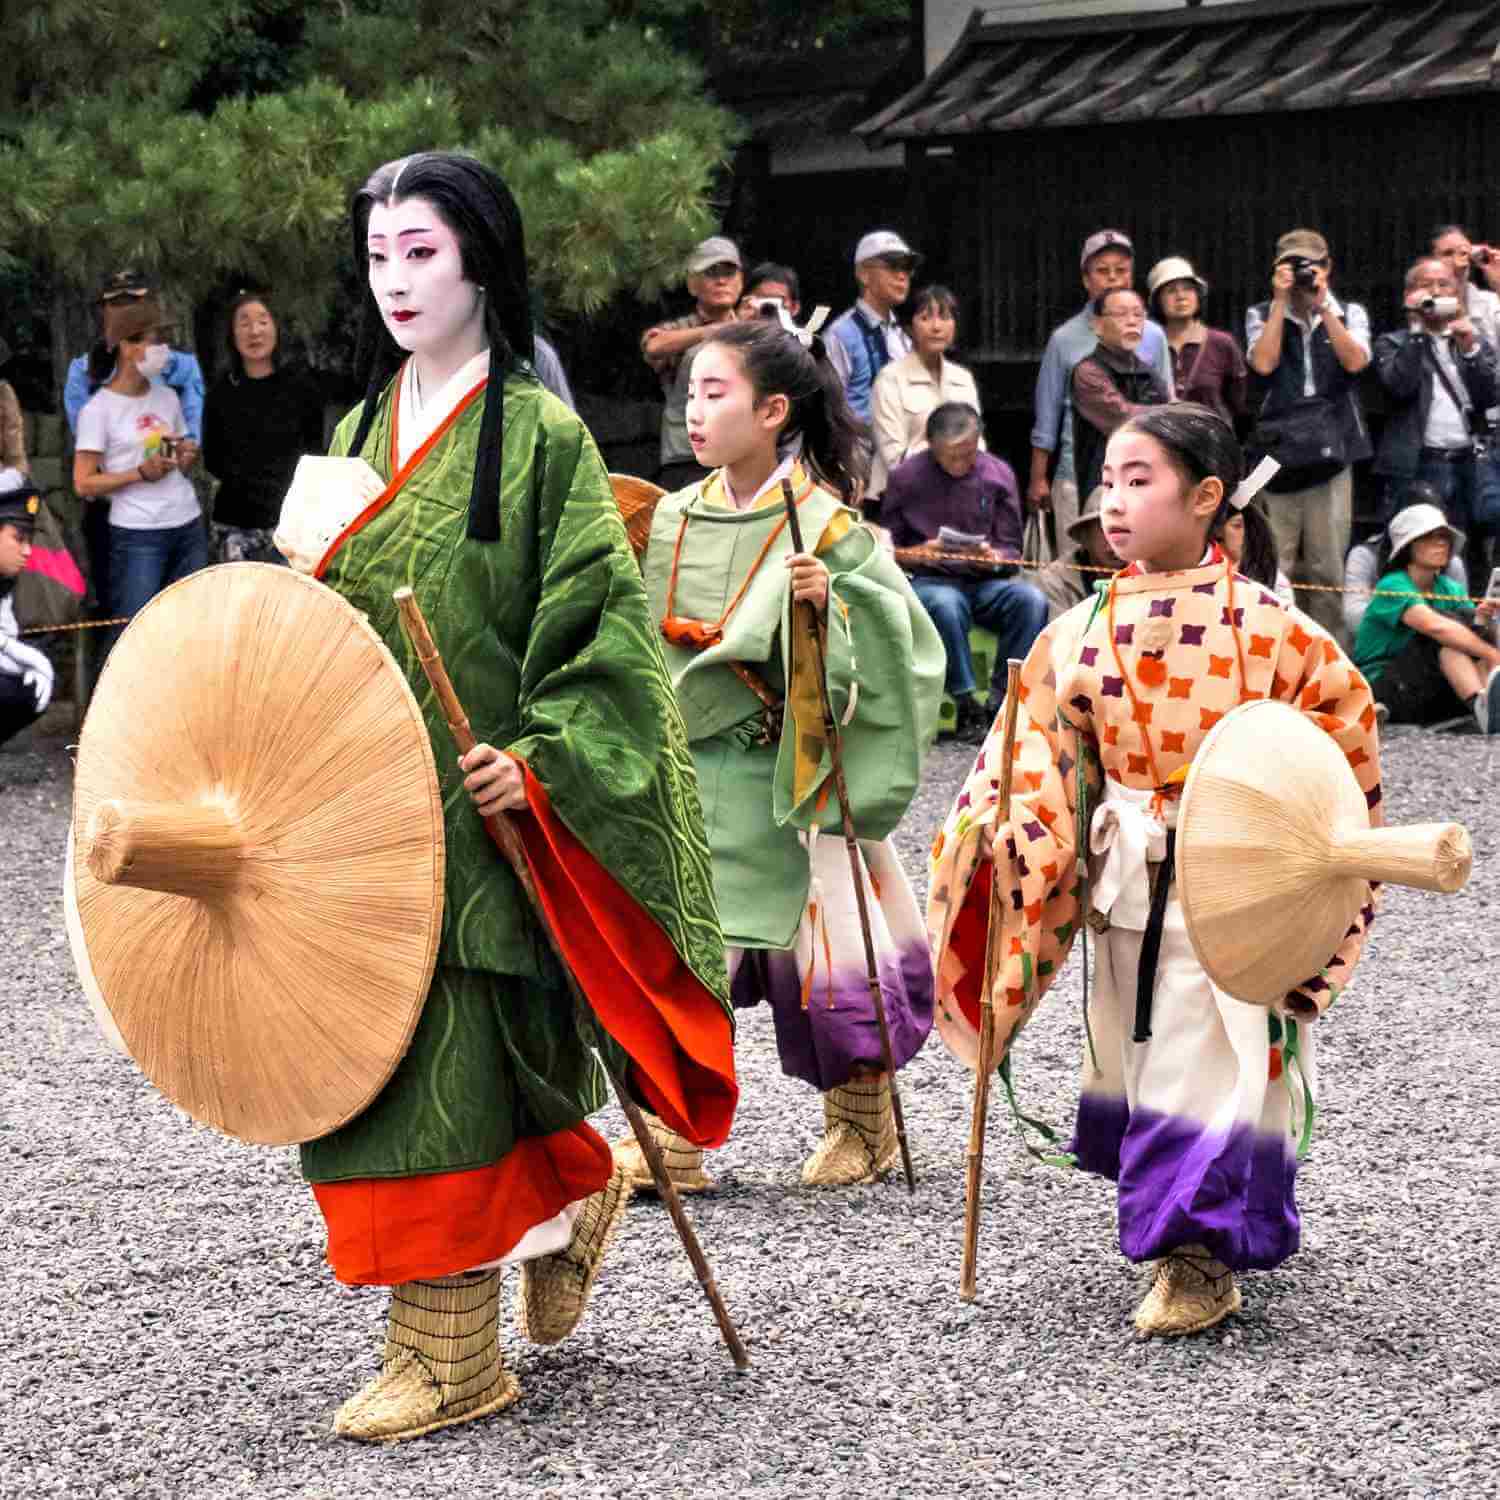 The Jidai Matsuri Festival is a traditional Japanese festival held annually on October 22 in Kyoto, Japan = Shutterstock 2